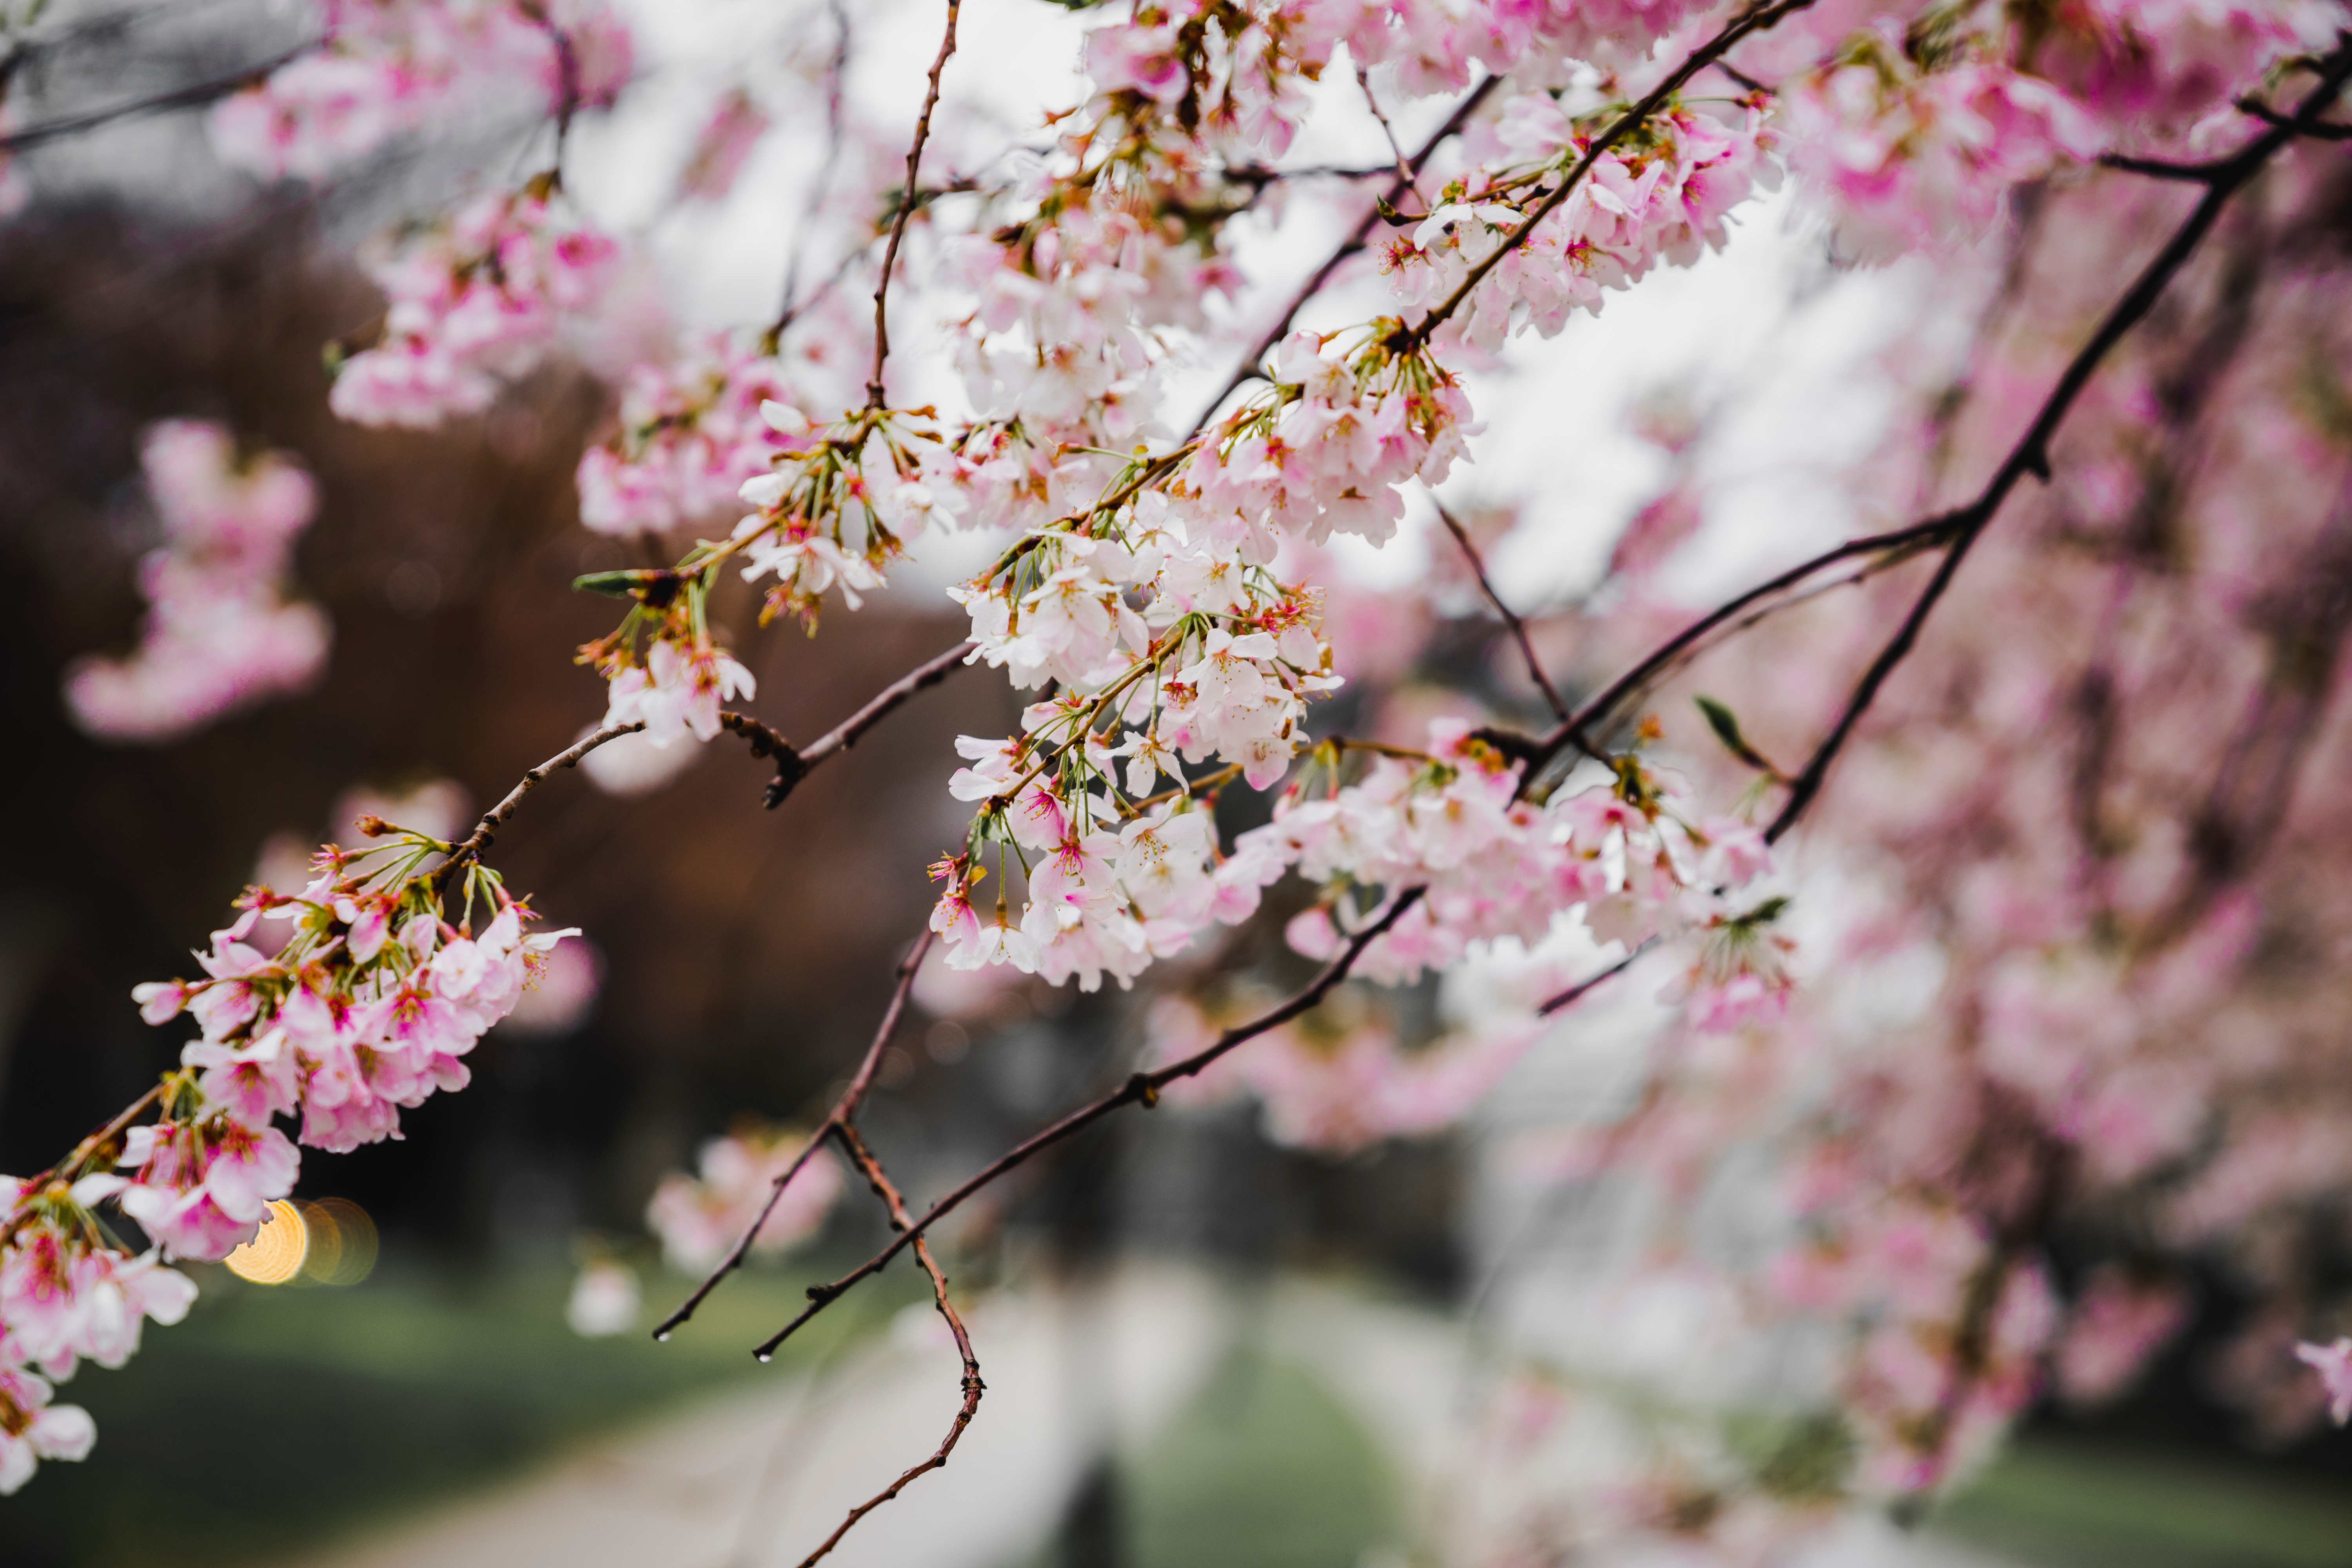 "This is the day the Lord has made. Let us rejoice and be glad," Vickie would say each day. But there is no past for her to replay now, or future to ever fear. There are only the cherry trees with their pink blossoms turning white and floating down, turning the grass into Easter colors. (Unsplash/Redd Angelo)